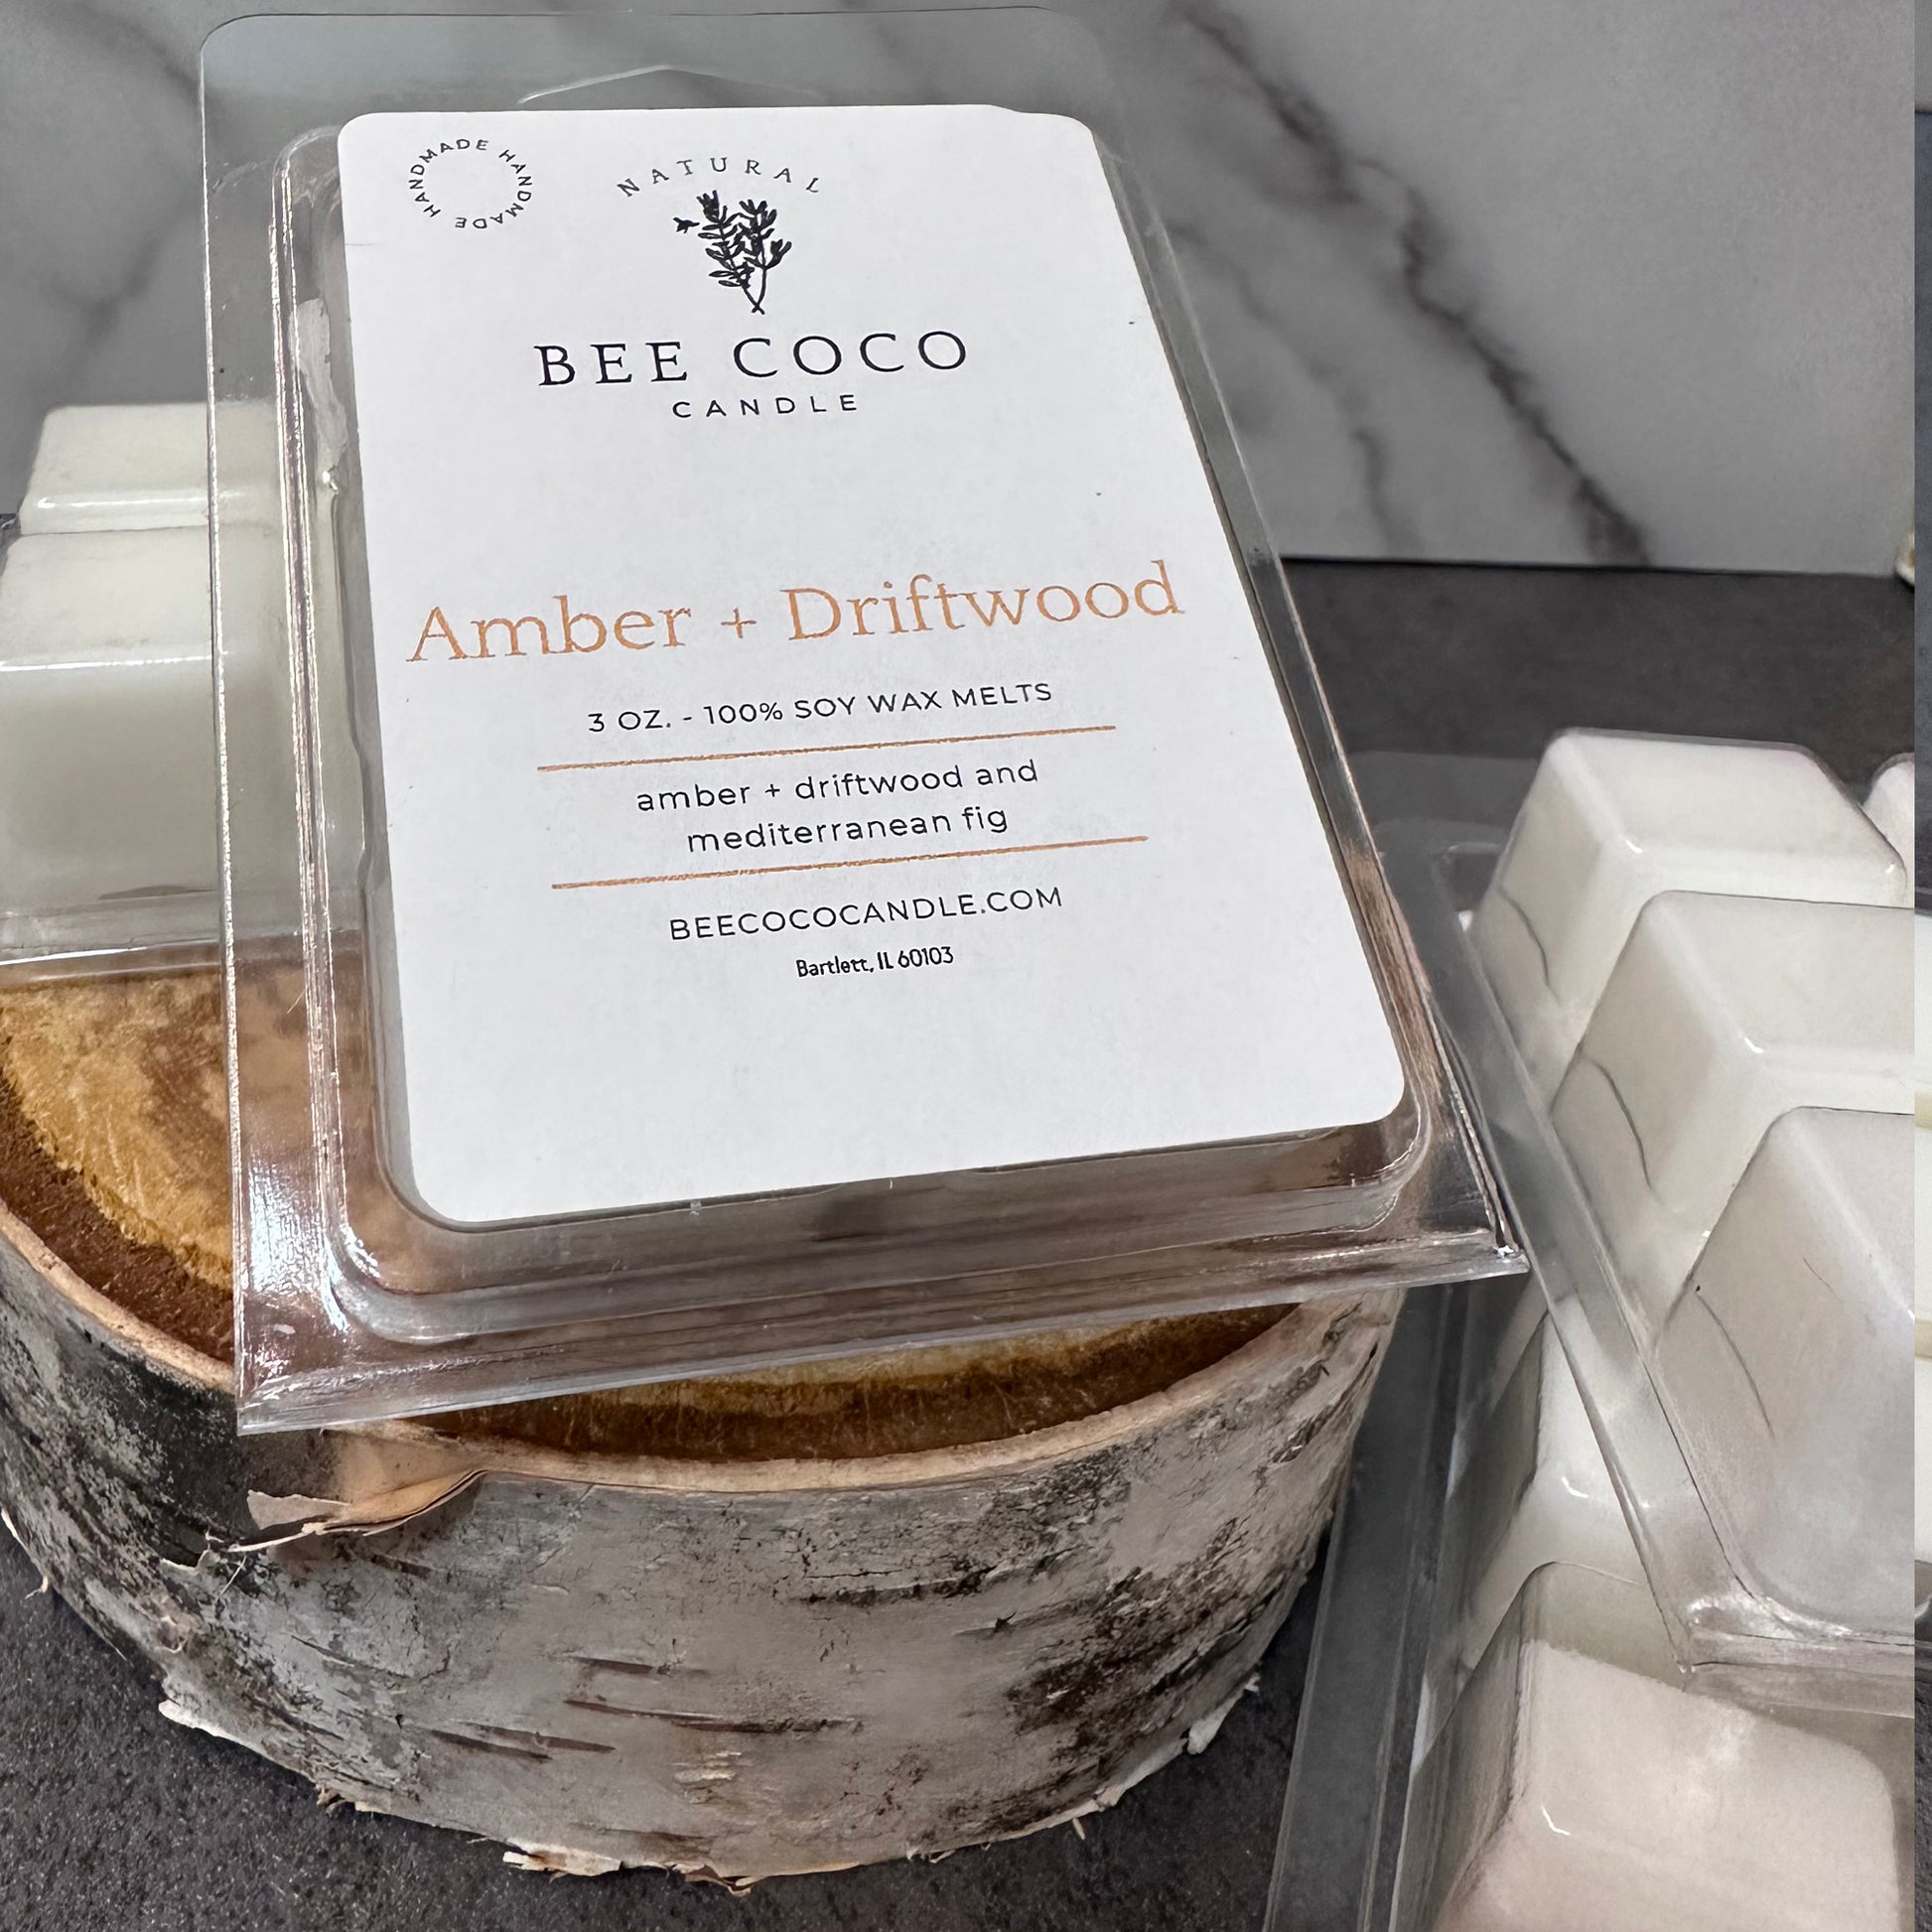 Bee Coco Candle Non-tox amber and driftwood wax melts